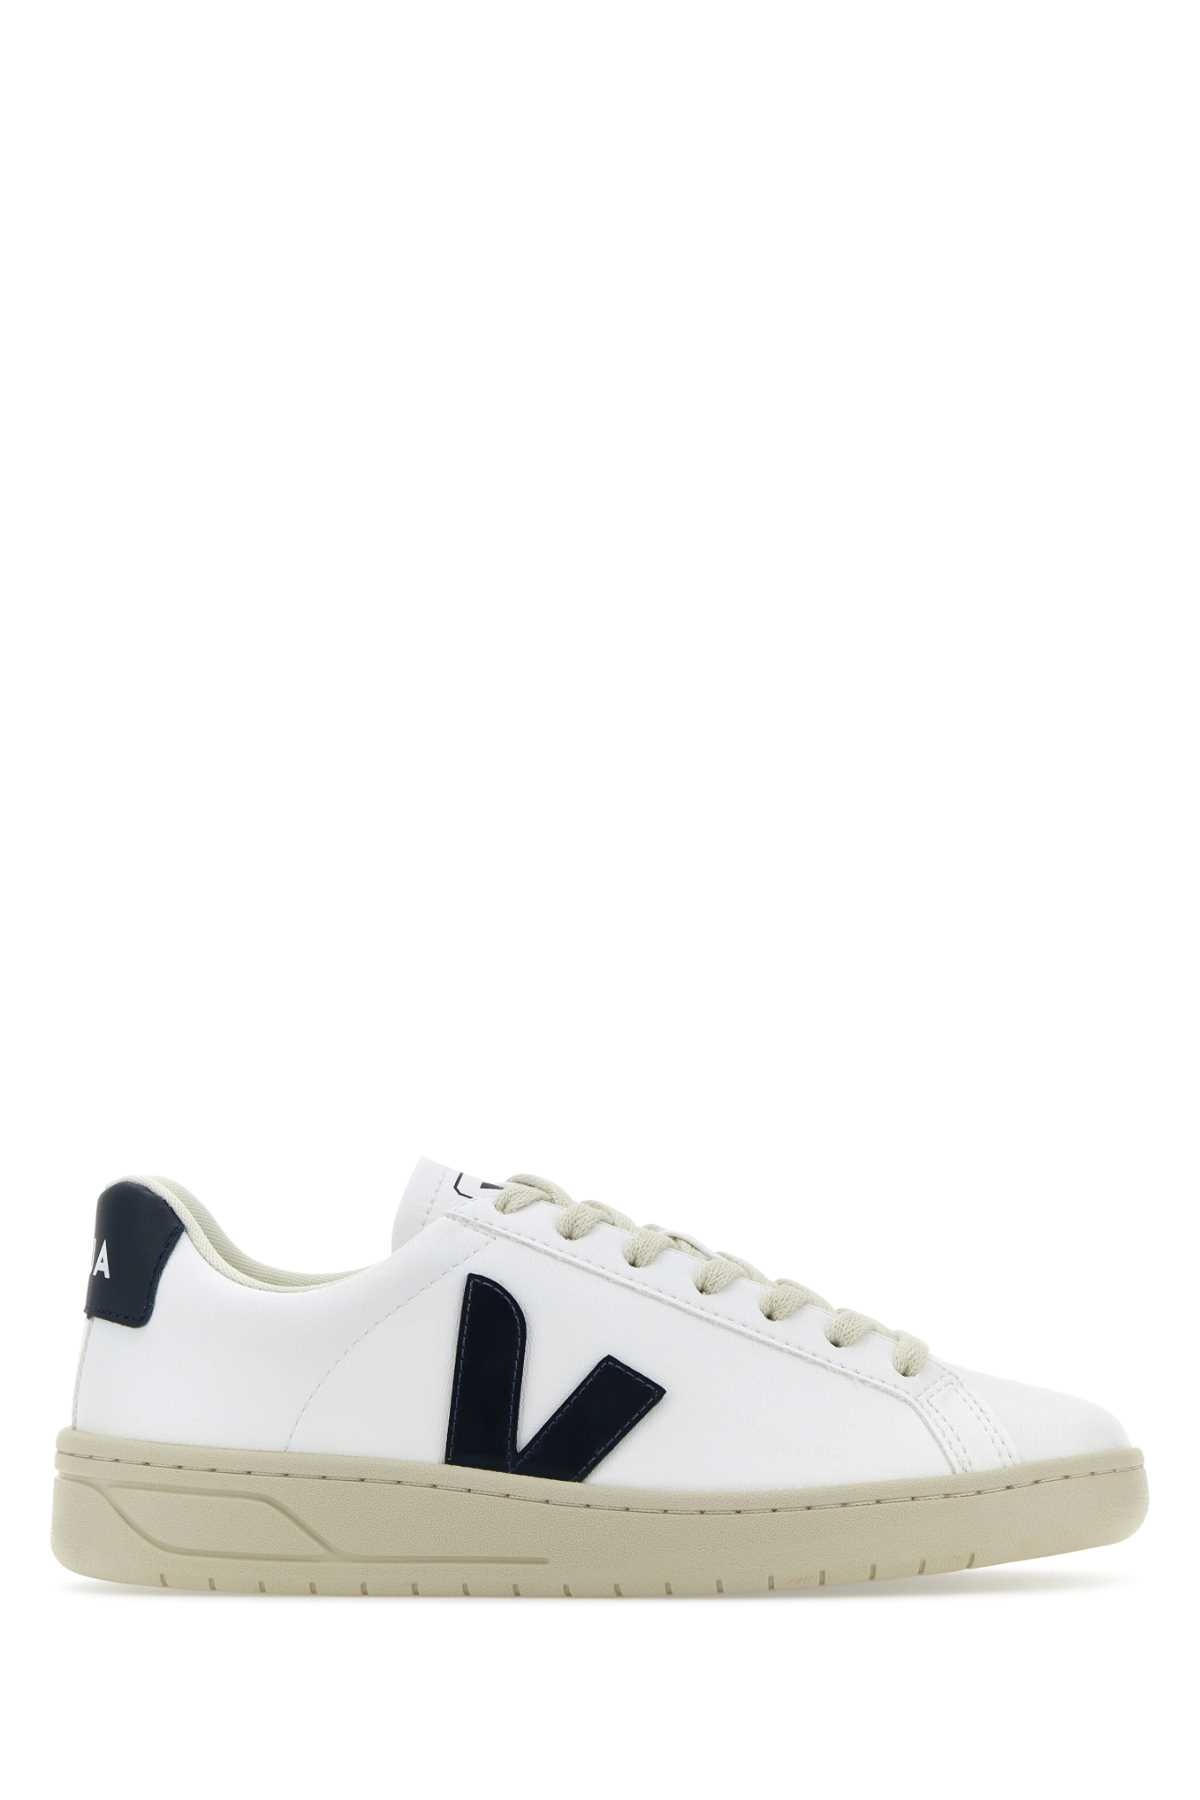 White Synthetic Leather Urca Sneakers